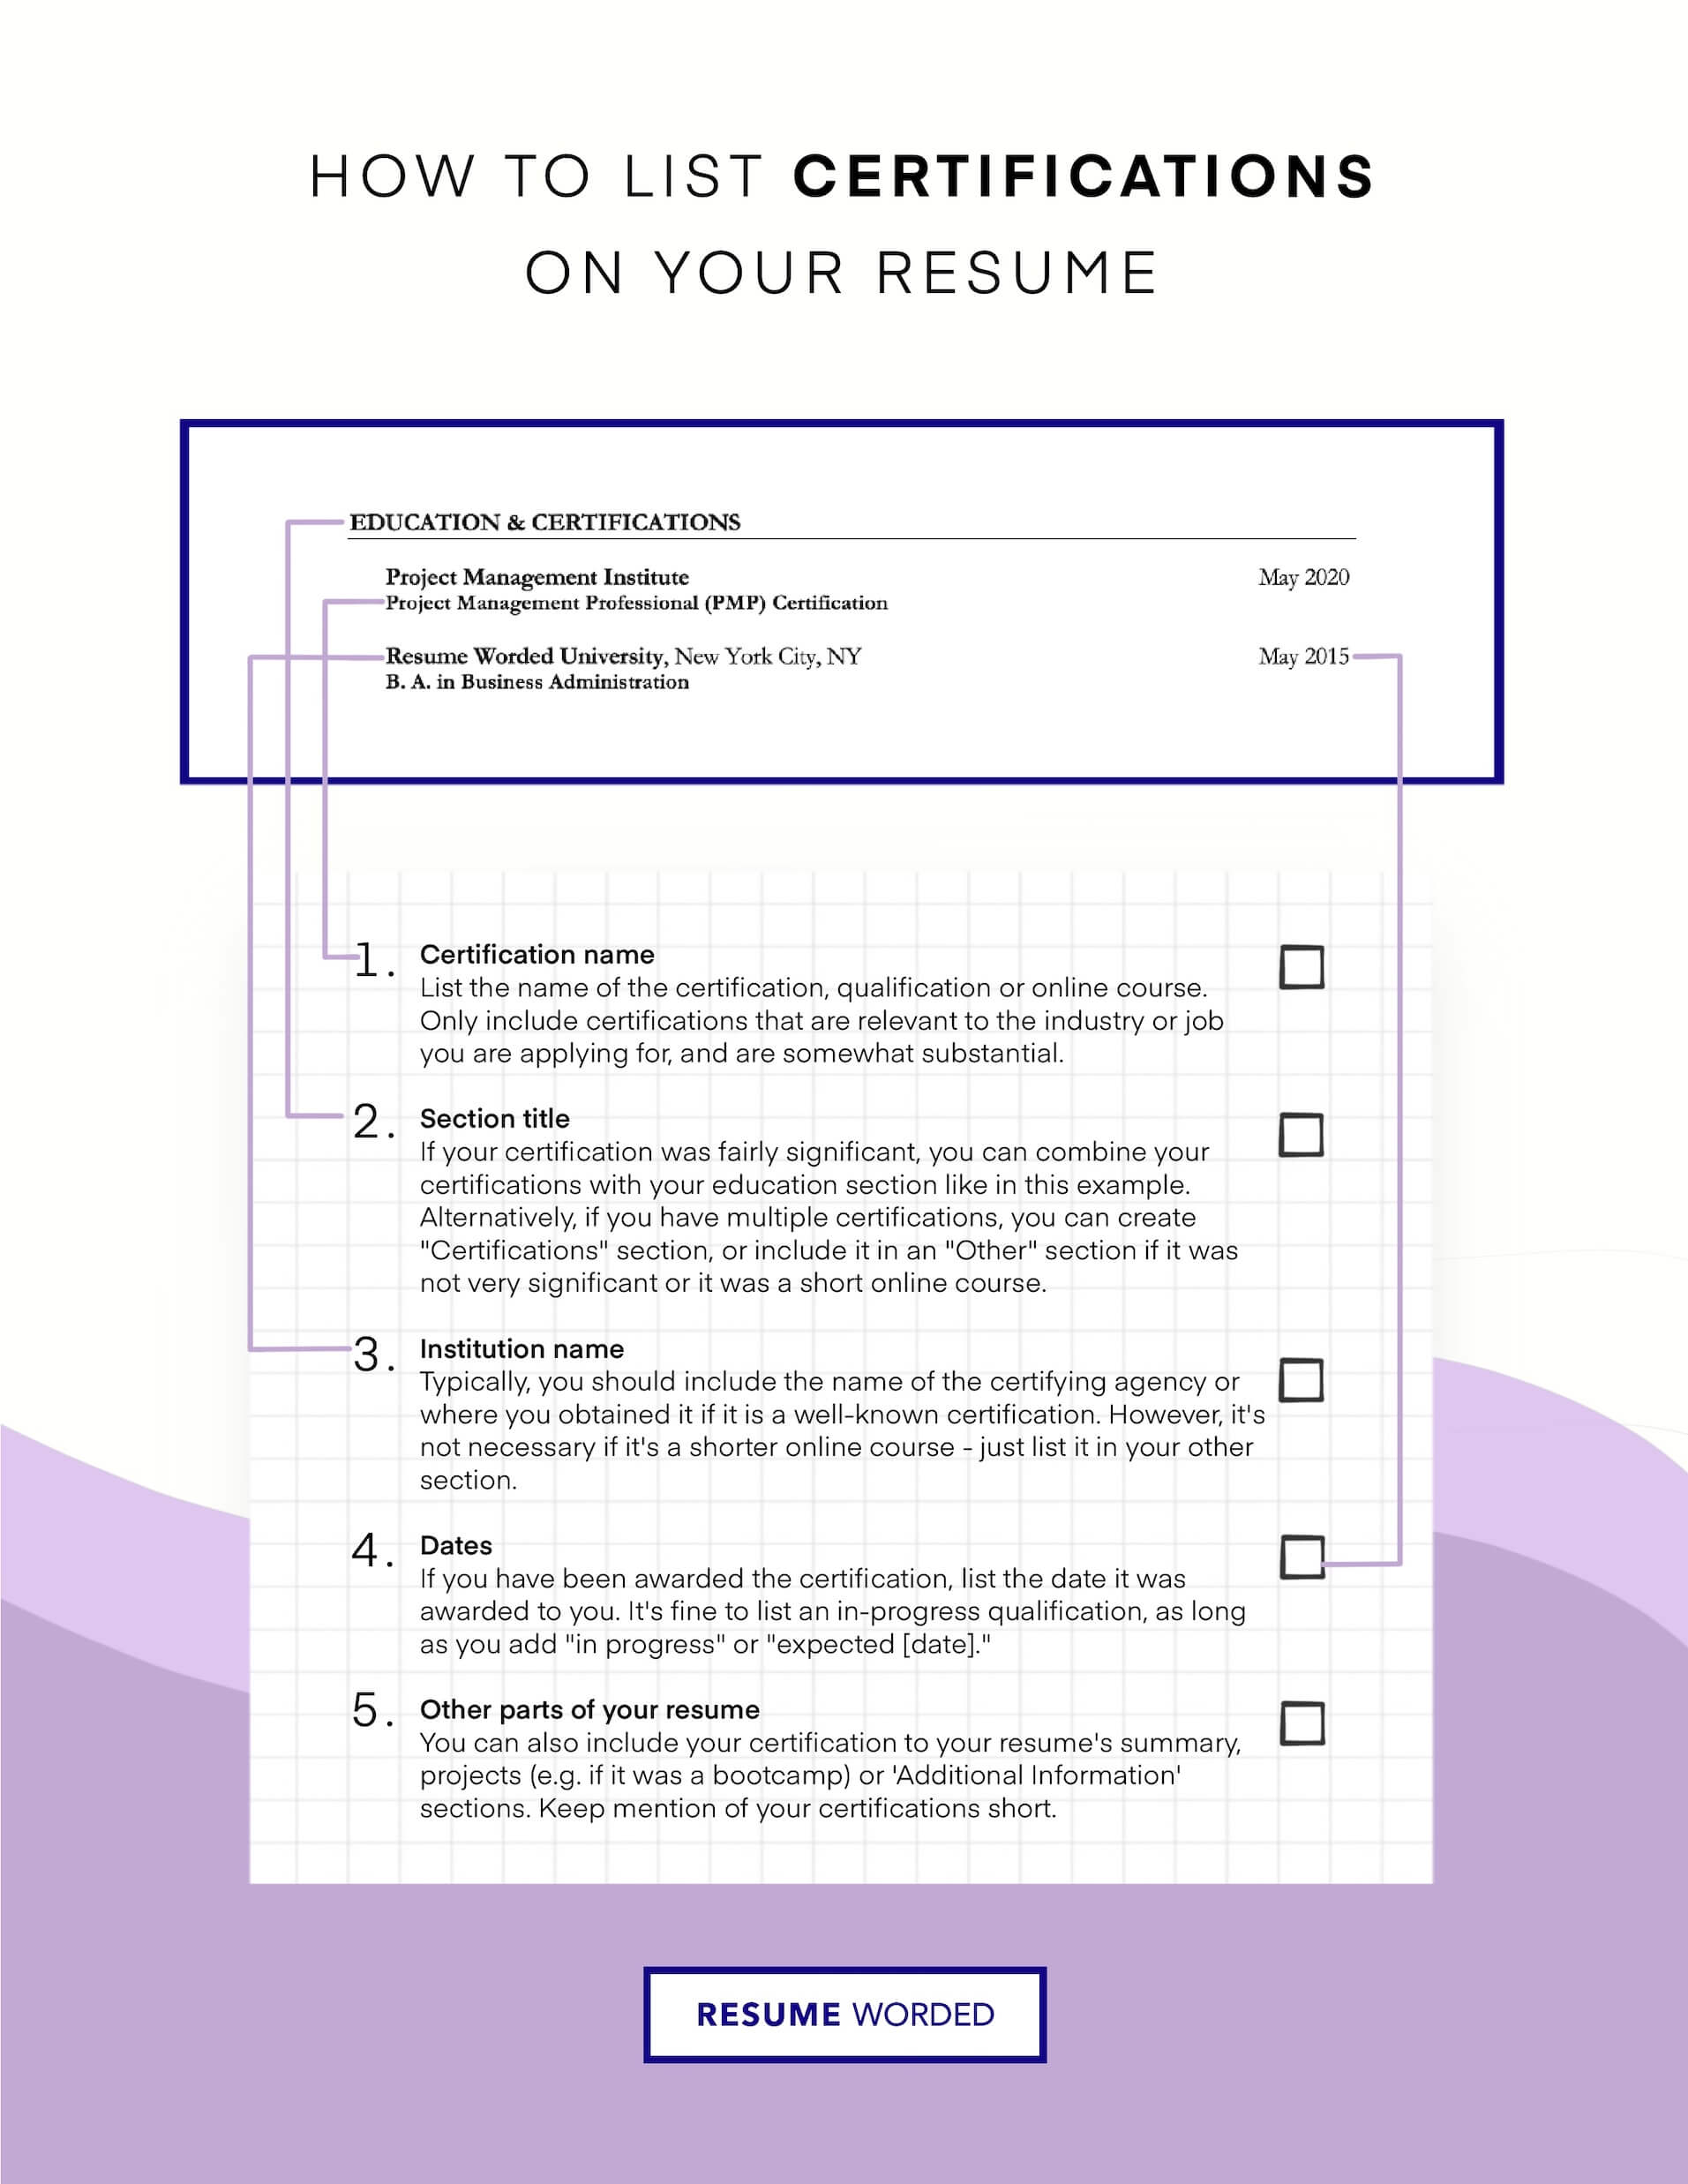 Get certification where possible. - Mid-Level Software Engineer Resume